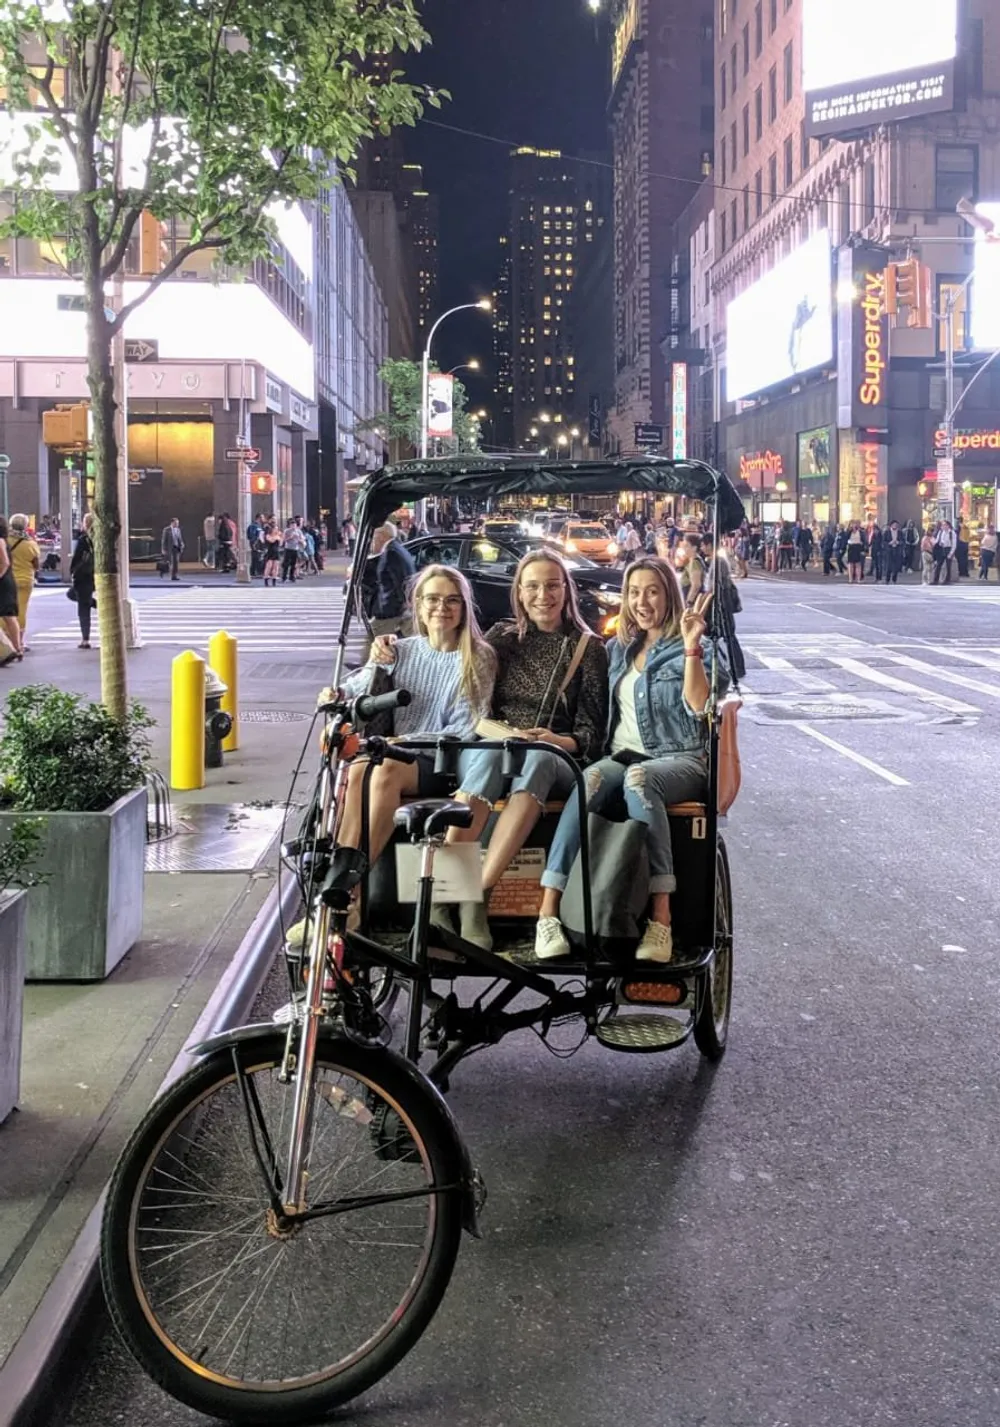 Three people are smiling while seated in a rickshaw on a brightly lit city street at night